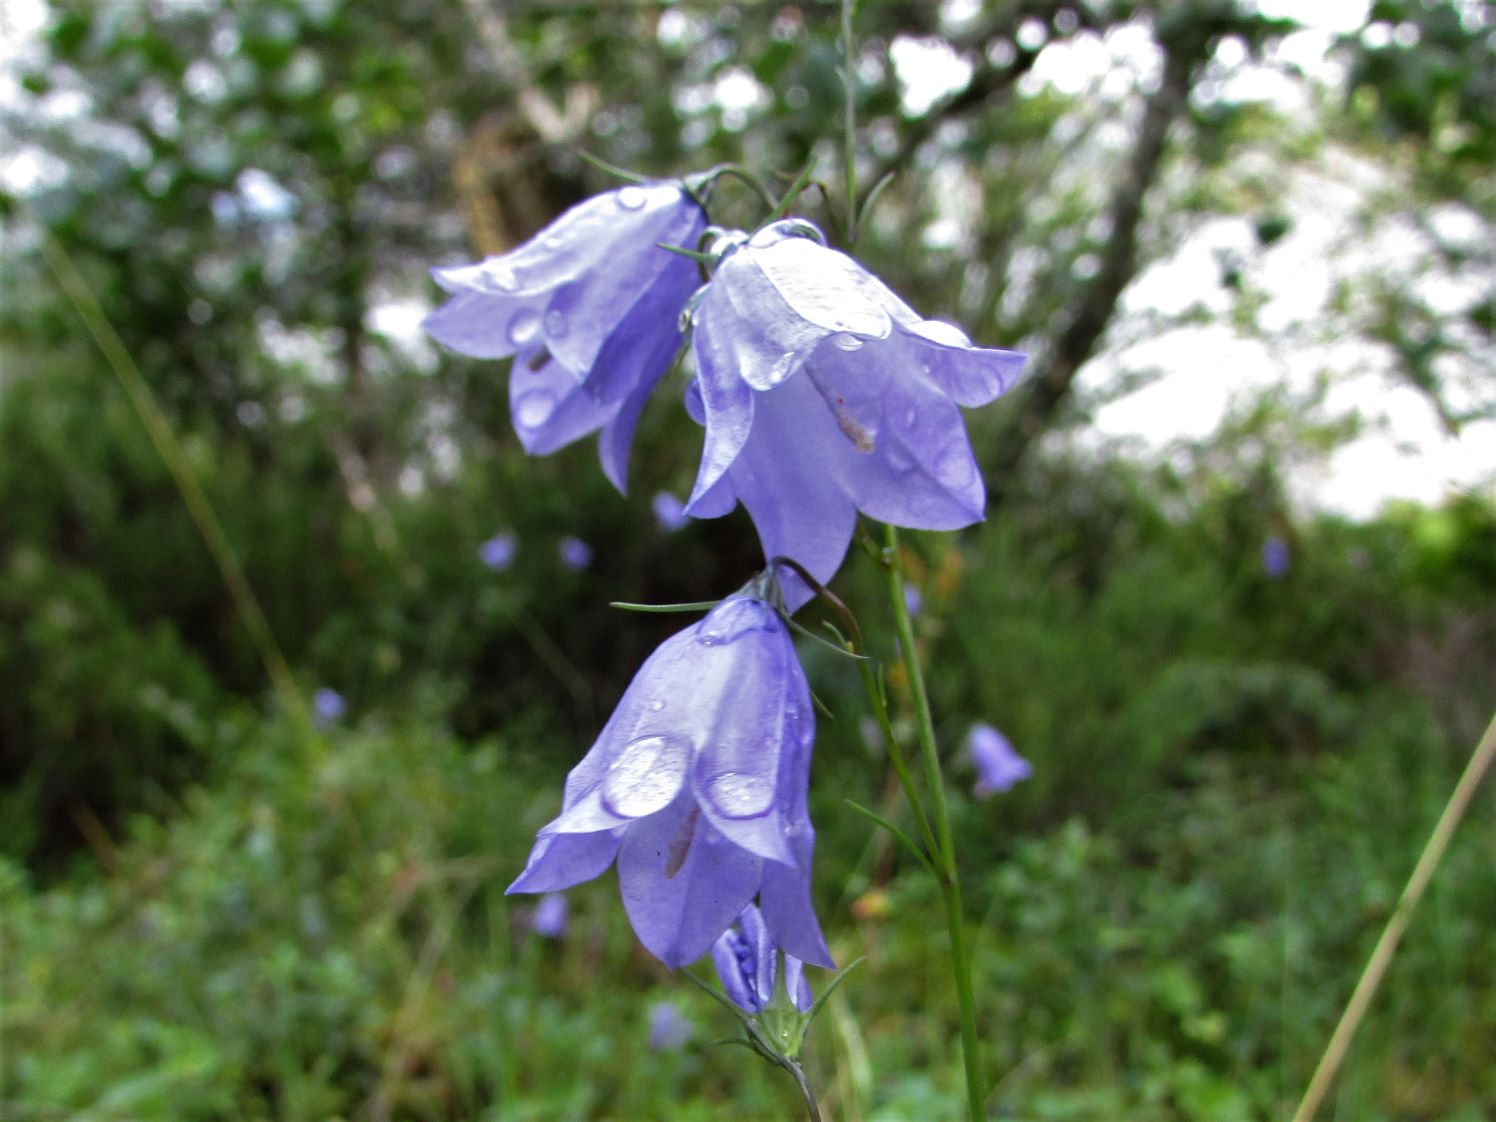 where does the word harebell originate and what does harebell mean